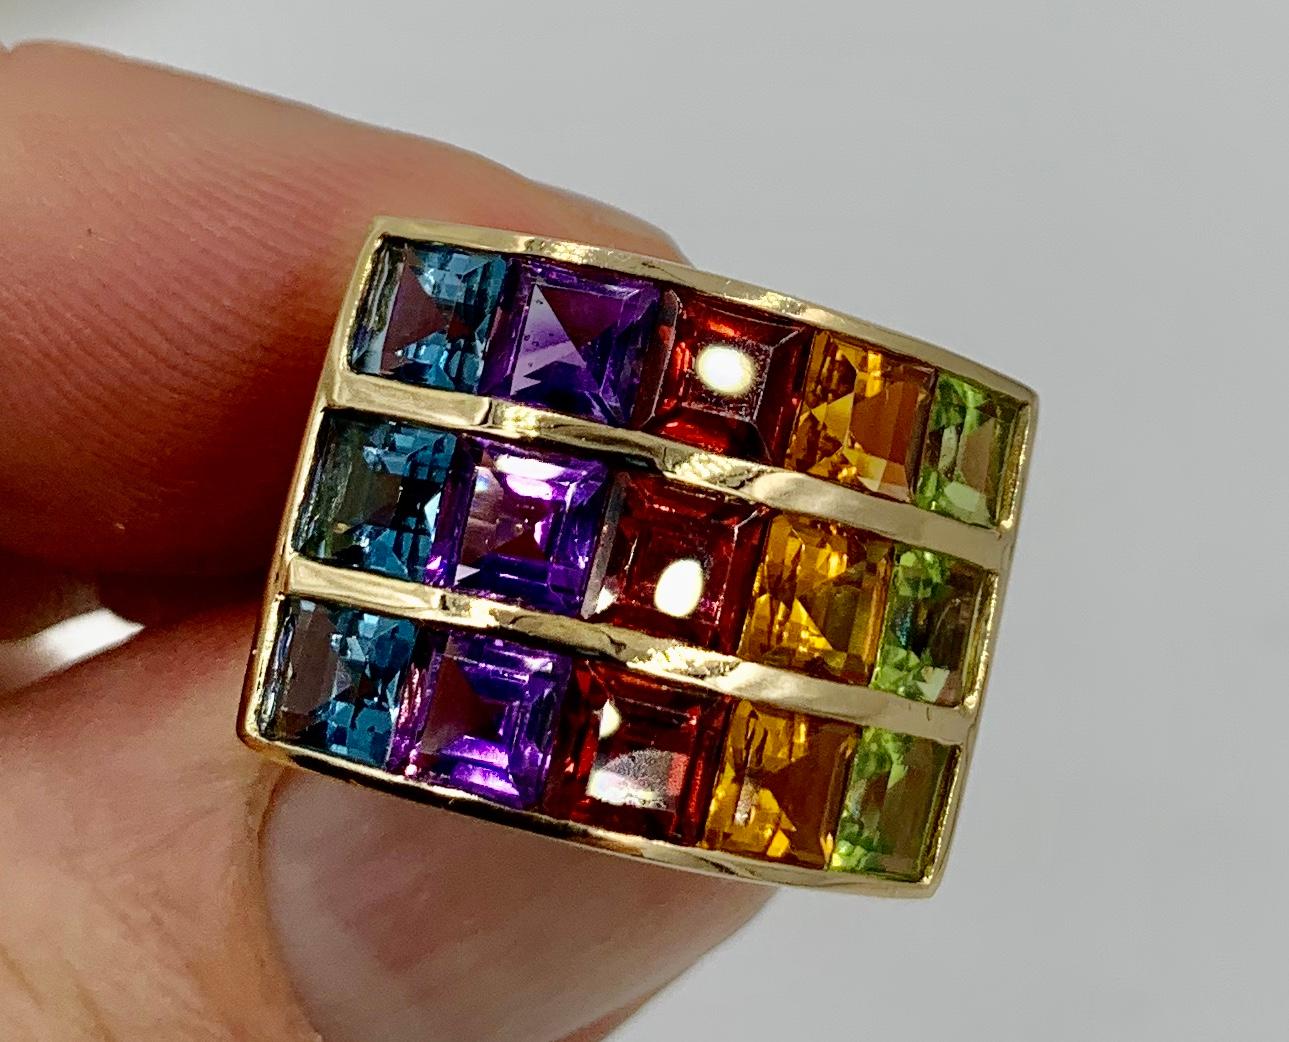 A spectacular Retro Ring set with a rainbow of gorgeous gems - Topaz, Amethyst, Garnet, Citrine and Peridot.  The gems are Square Cut and are channel set in 14 Karat Yellow Gold.  The gems are of the highest quality and the rainbow of colored jewels